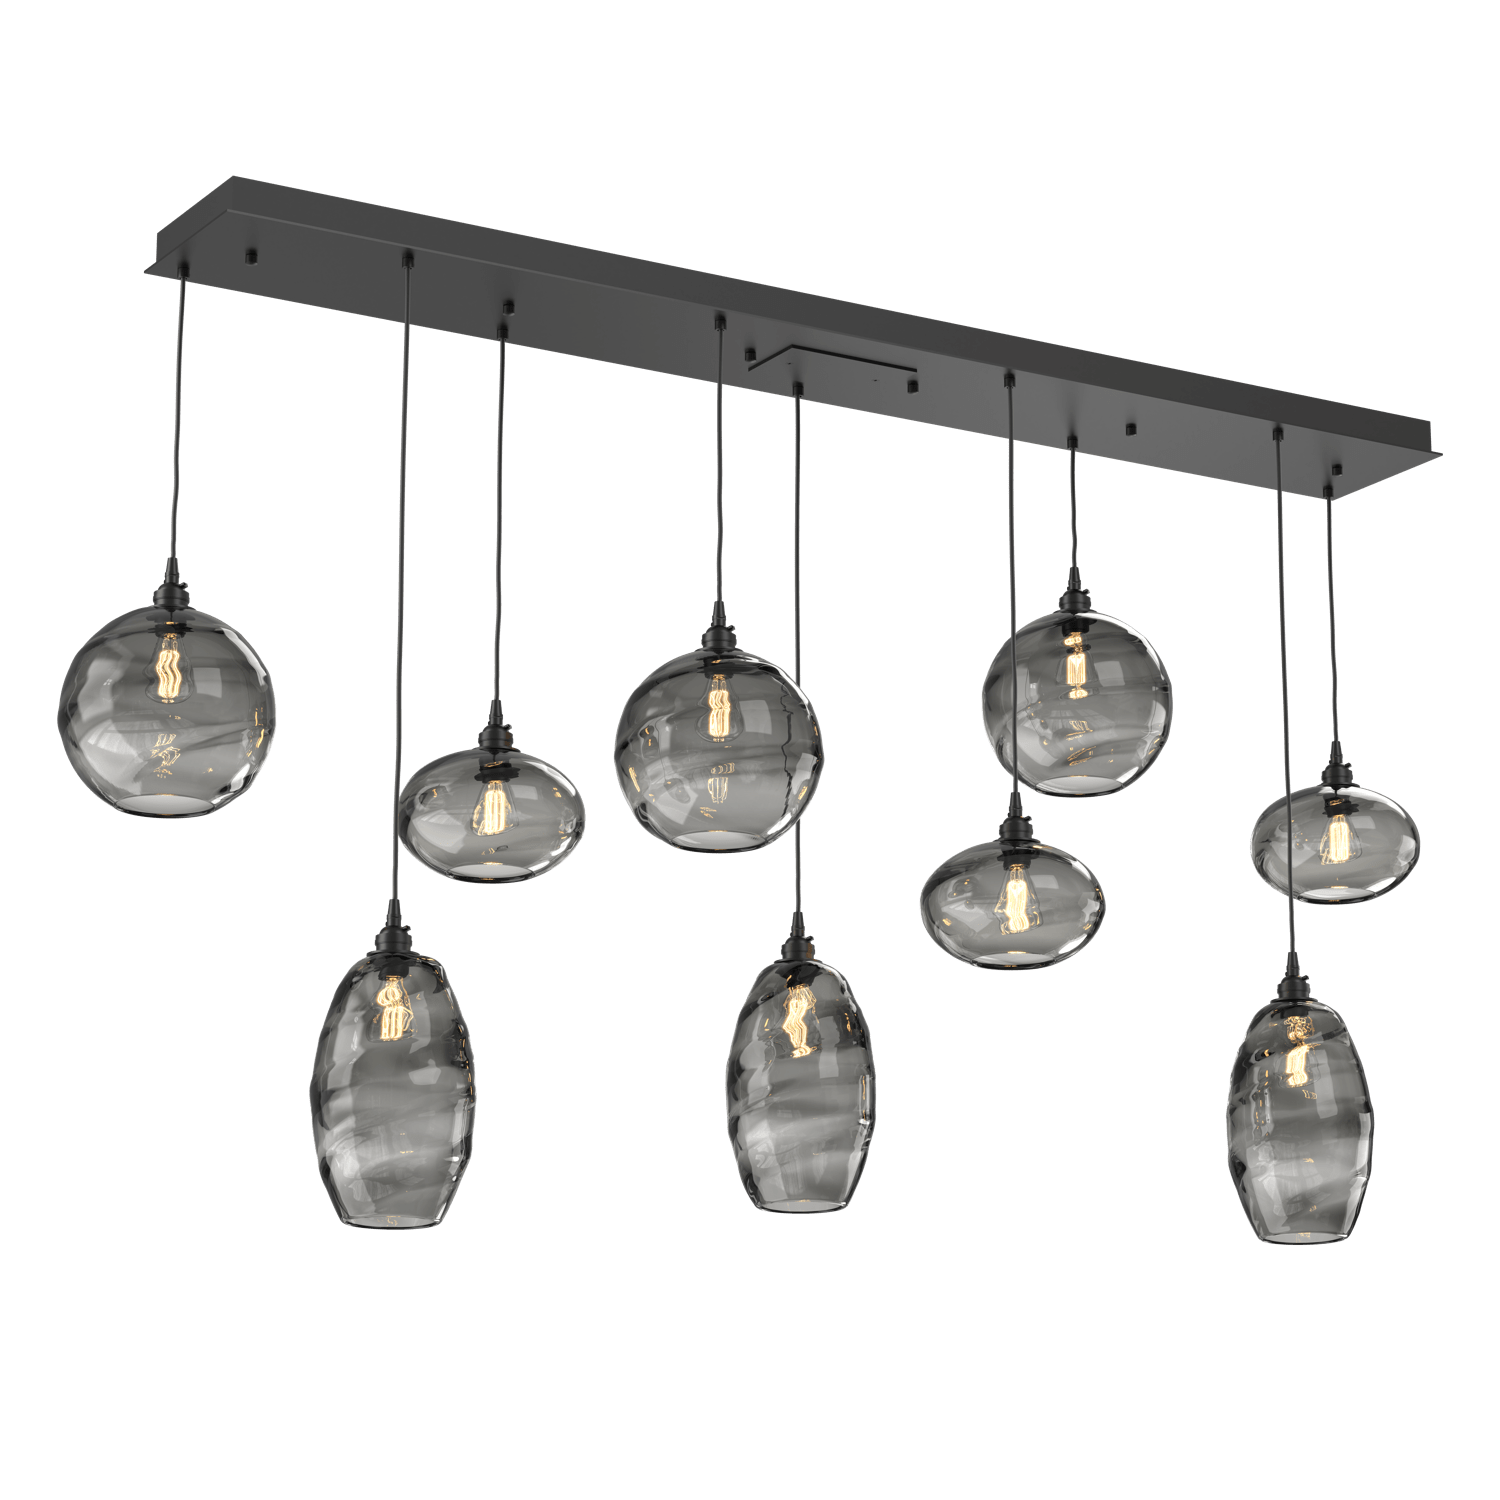 PLB0048-09-MB-OS-Hammerton-Studio-Optic-Blown-Glass-Misto-9-light-linear-pendant-chandelier-with-matte-black-finish-and-optic-smoke-blown-glass-shades-and-incandescent-lamping